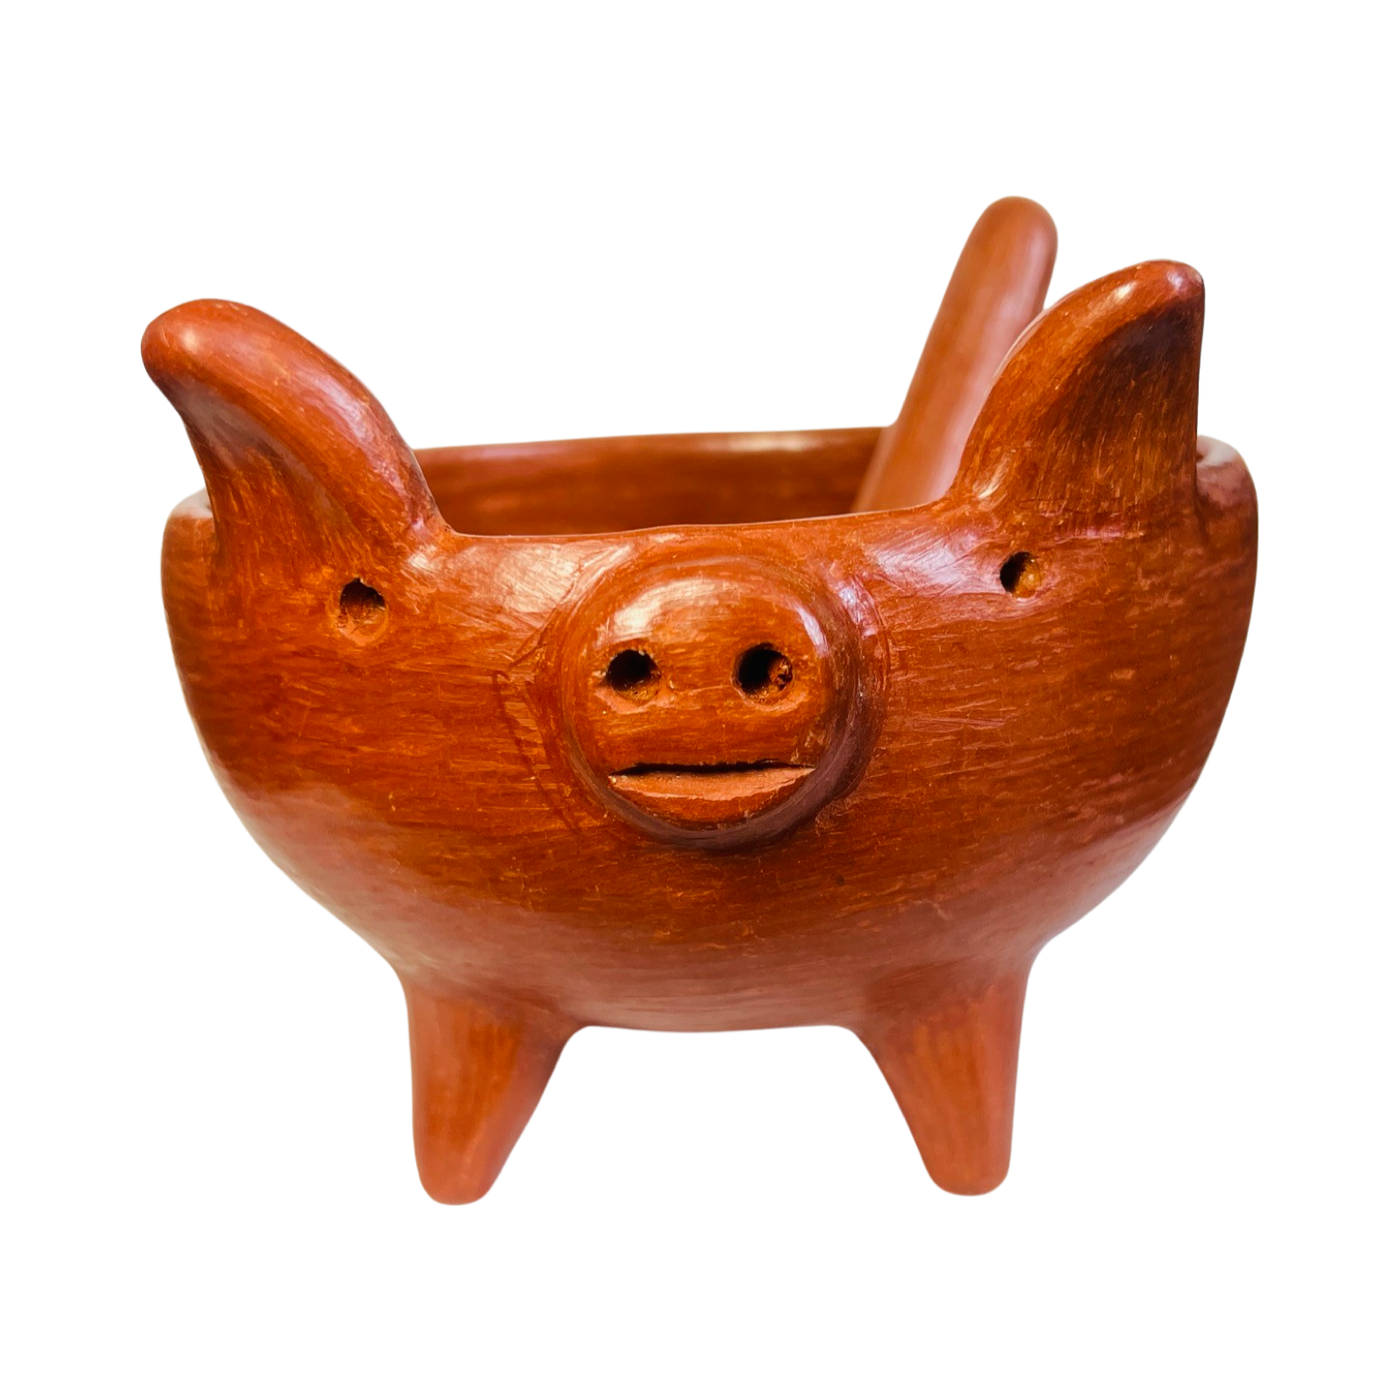 front view of red clay handsculpted spoon and bowl with pig legs and pig facial features